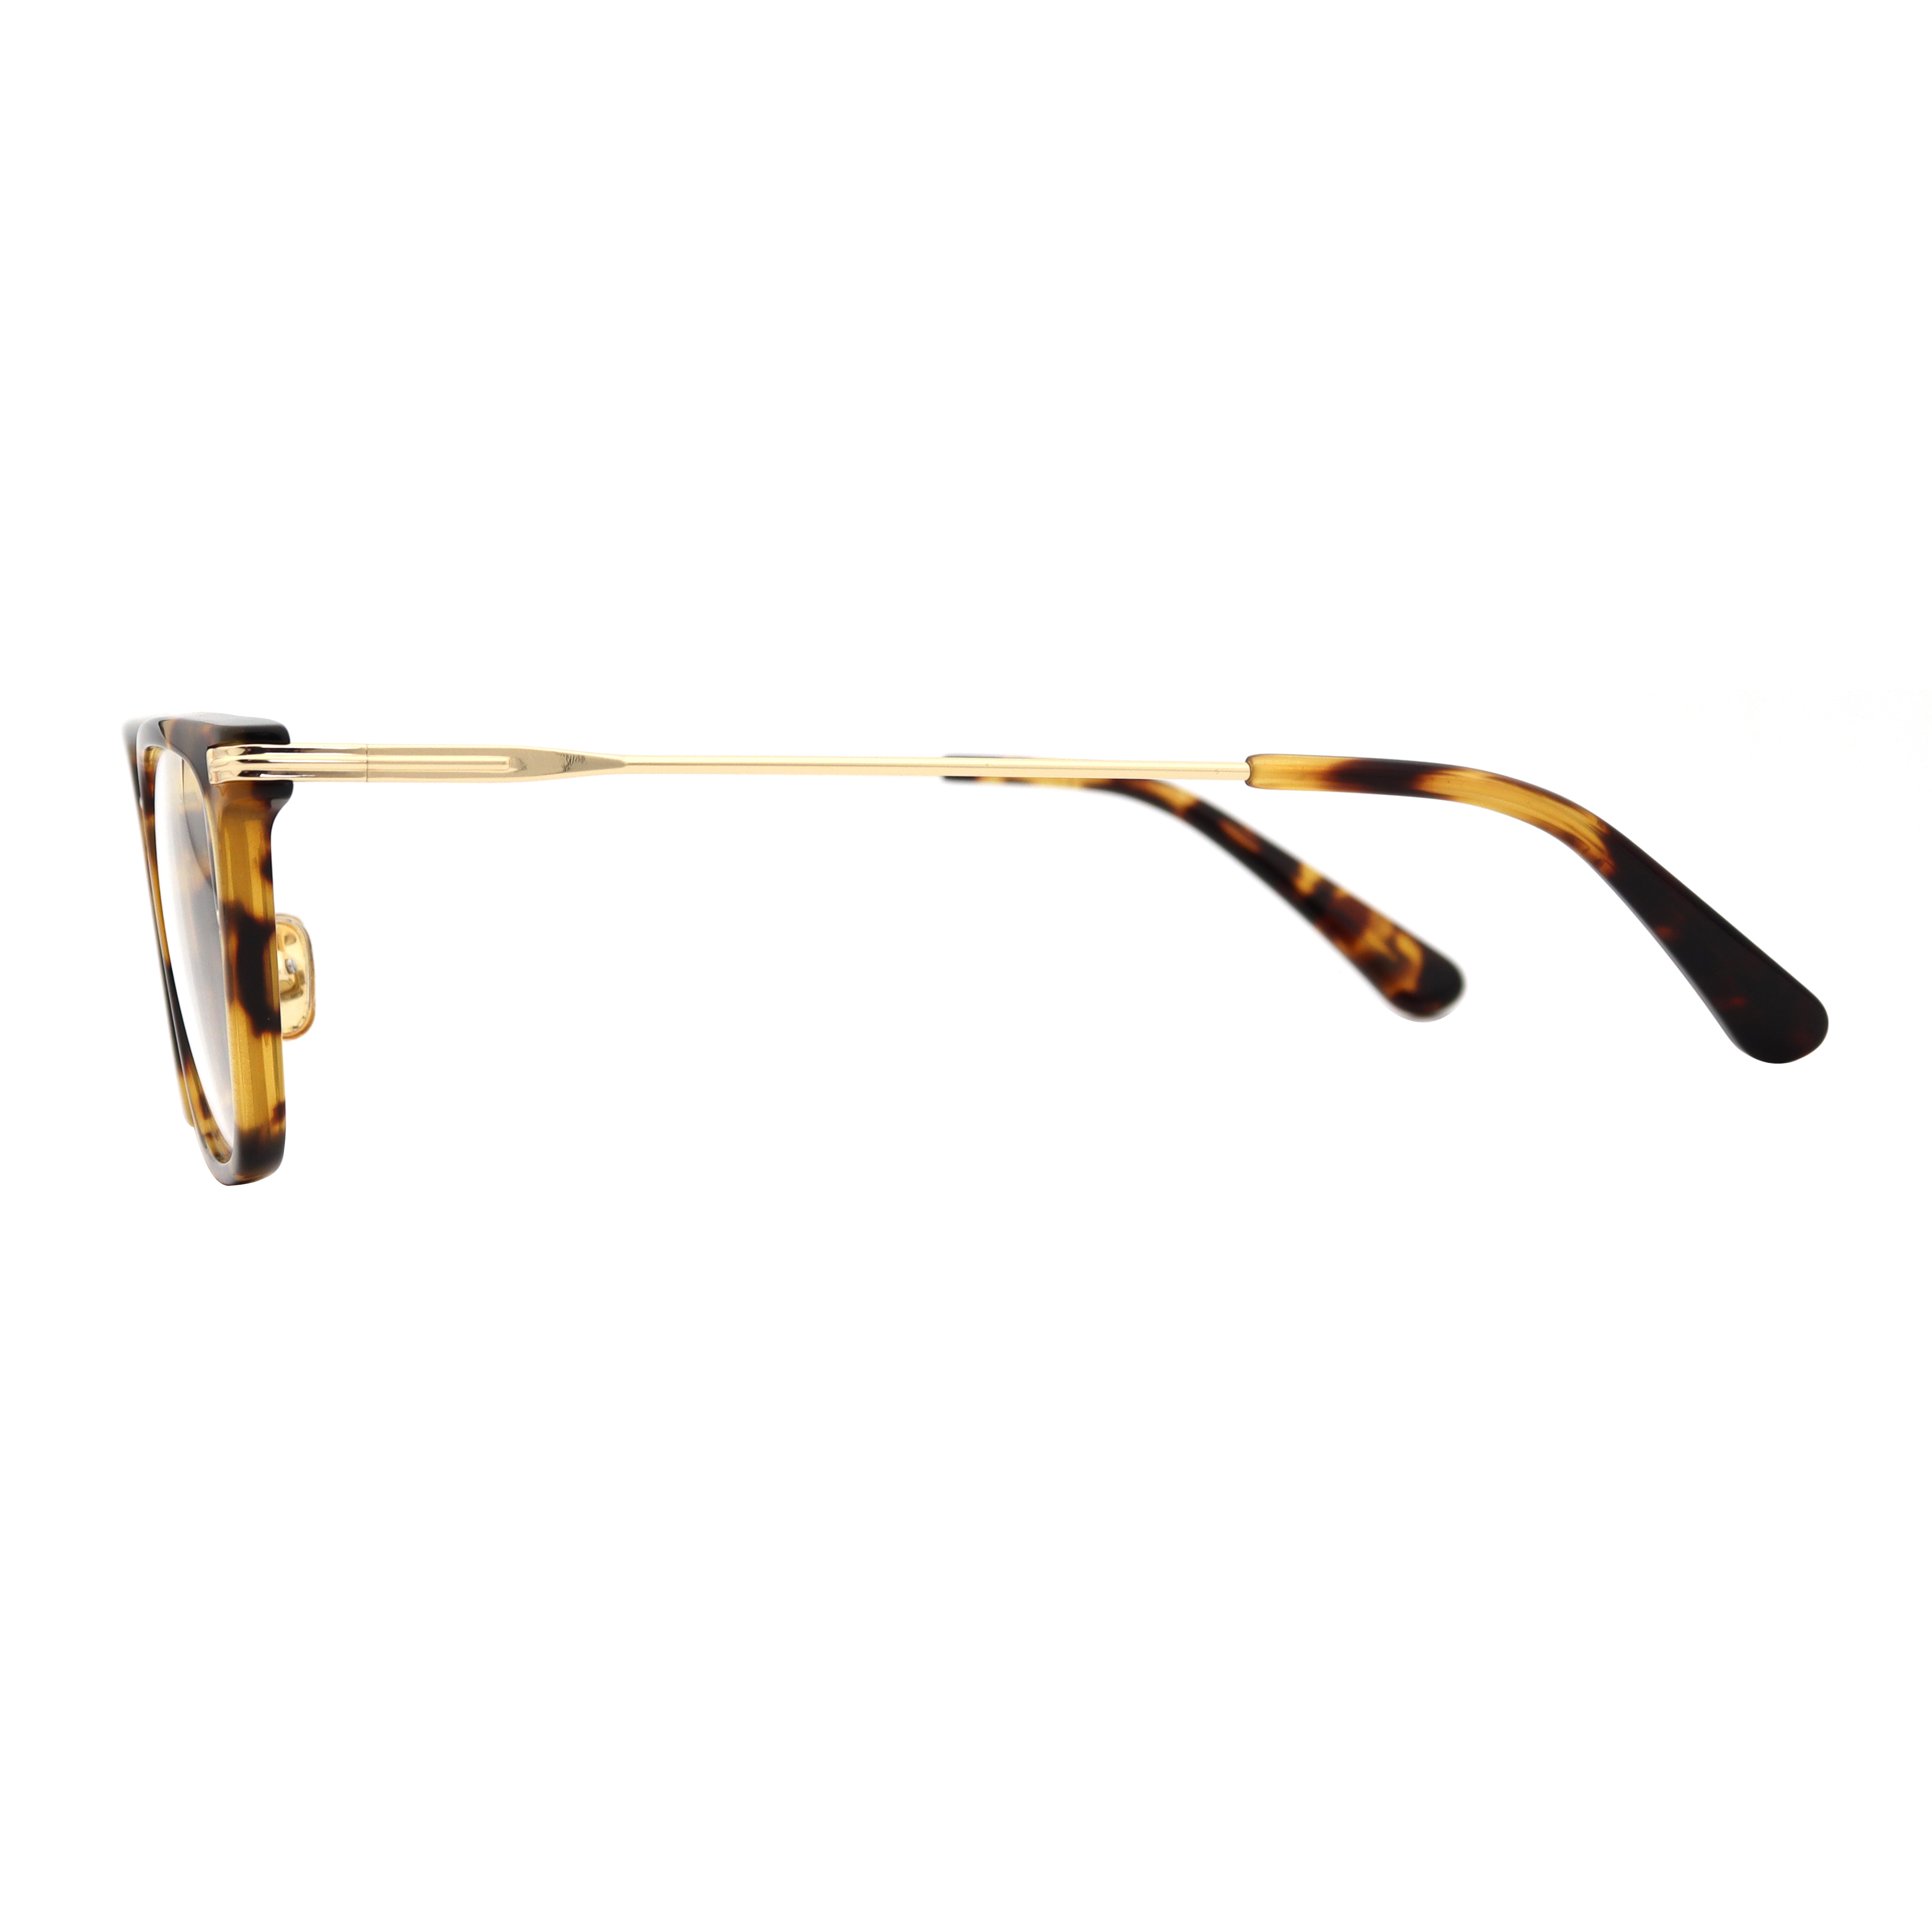 Mixed classic and fashion eyewear in acetate and metal